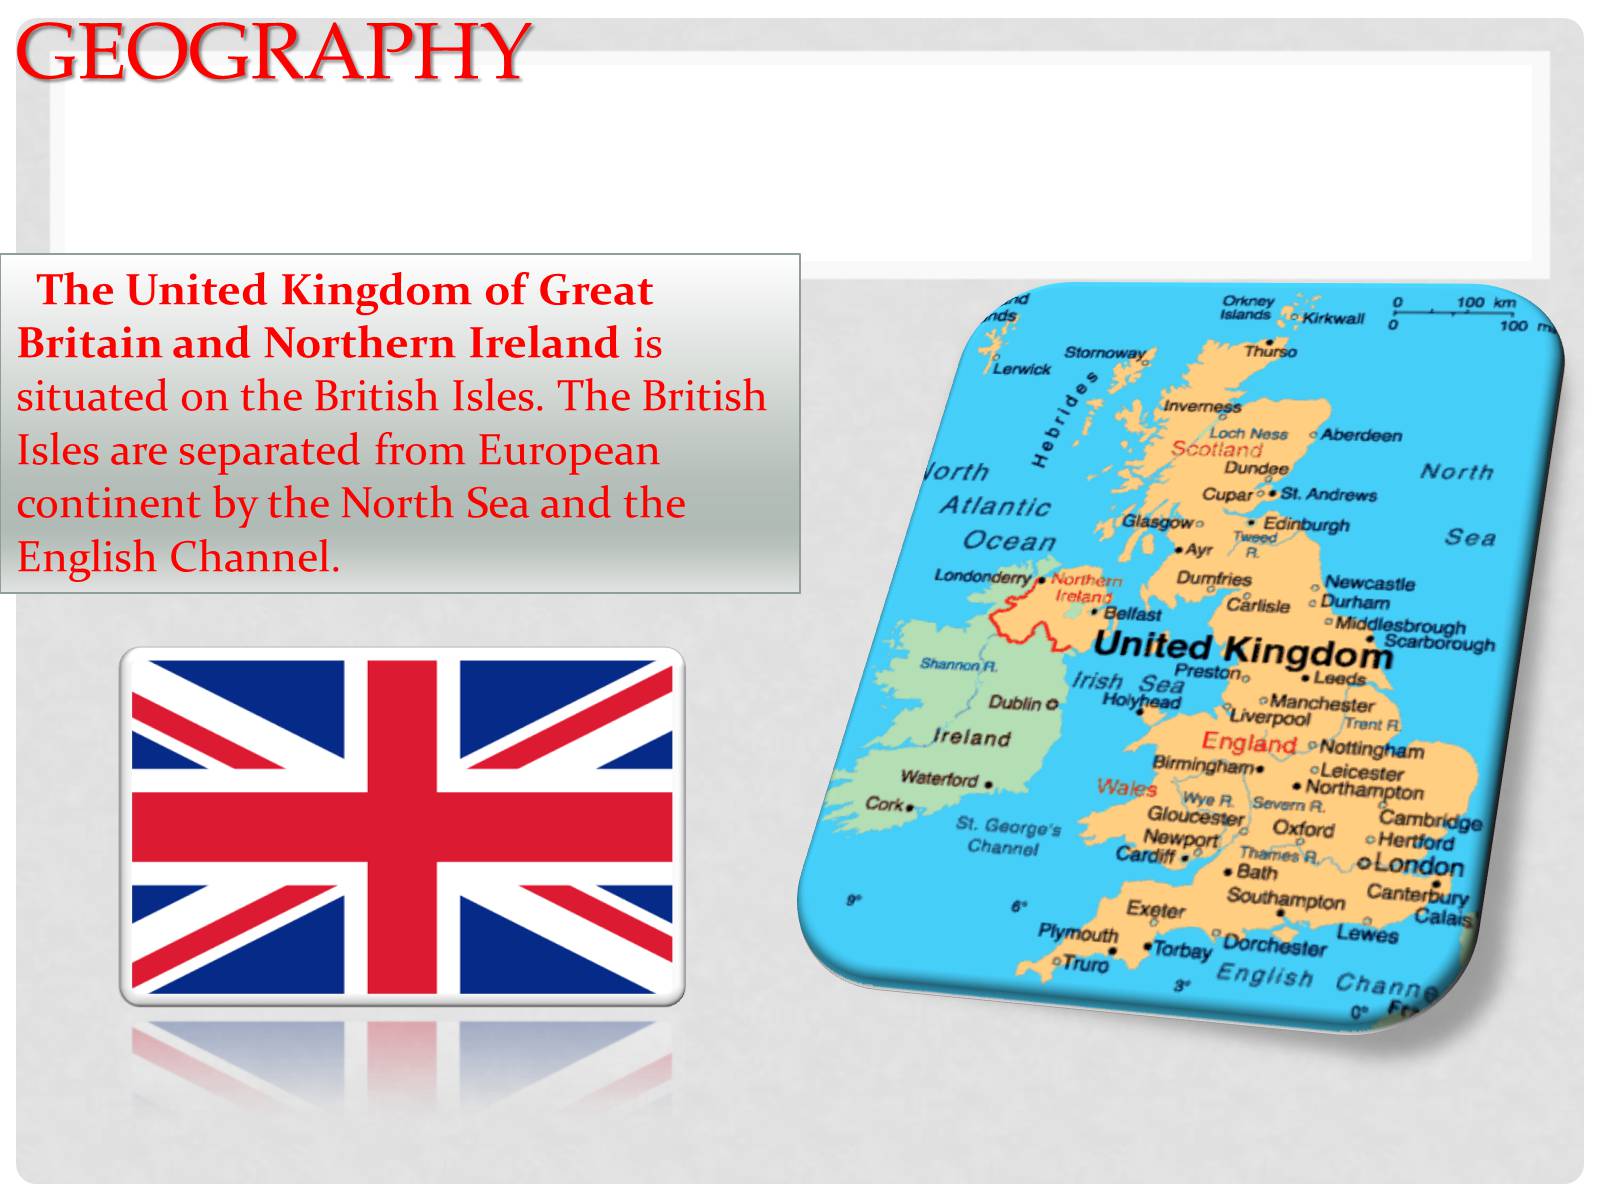 Be great на английском. The United Kingdom of great Britain and Northern Ireland Geography. Great Britain презентация. Cities of great Britain презентация. Презентация great British.